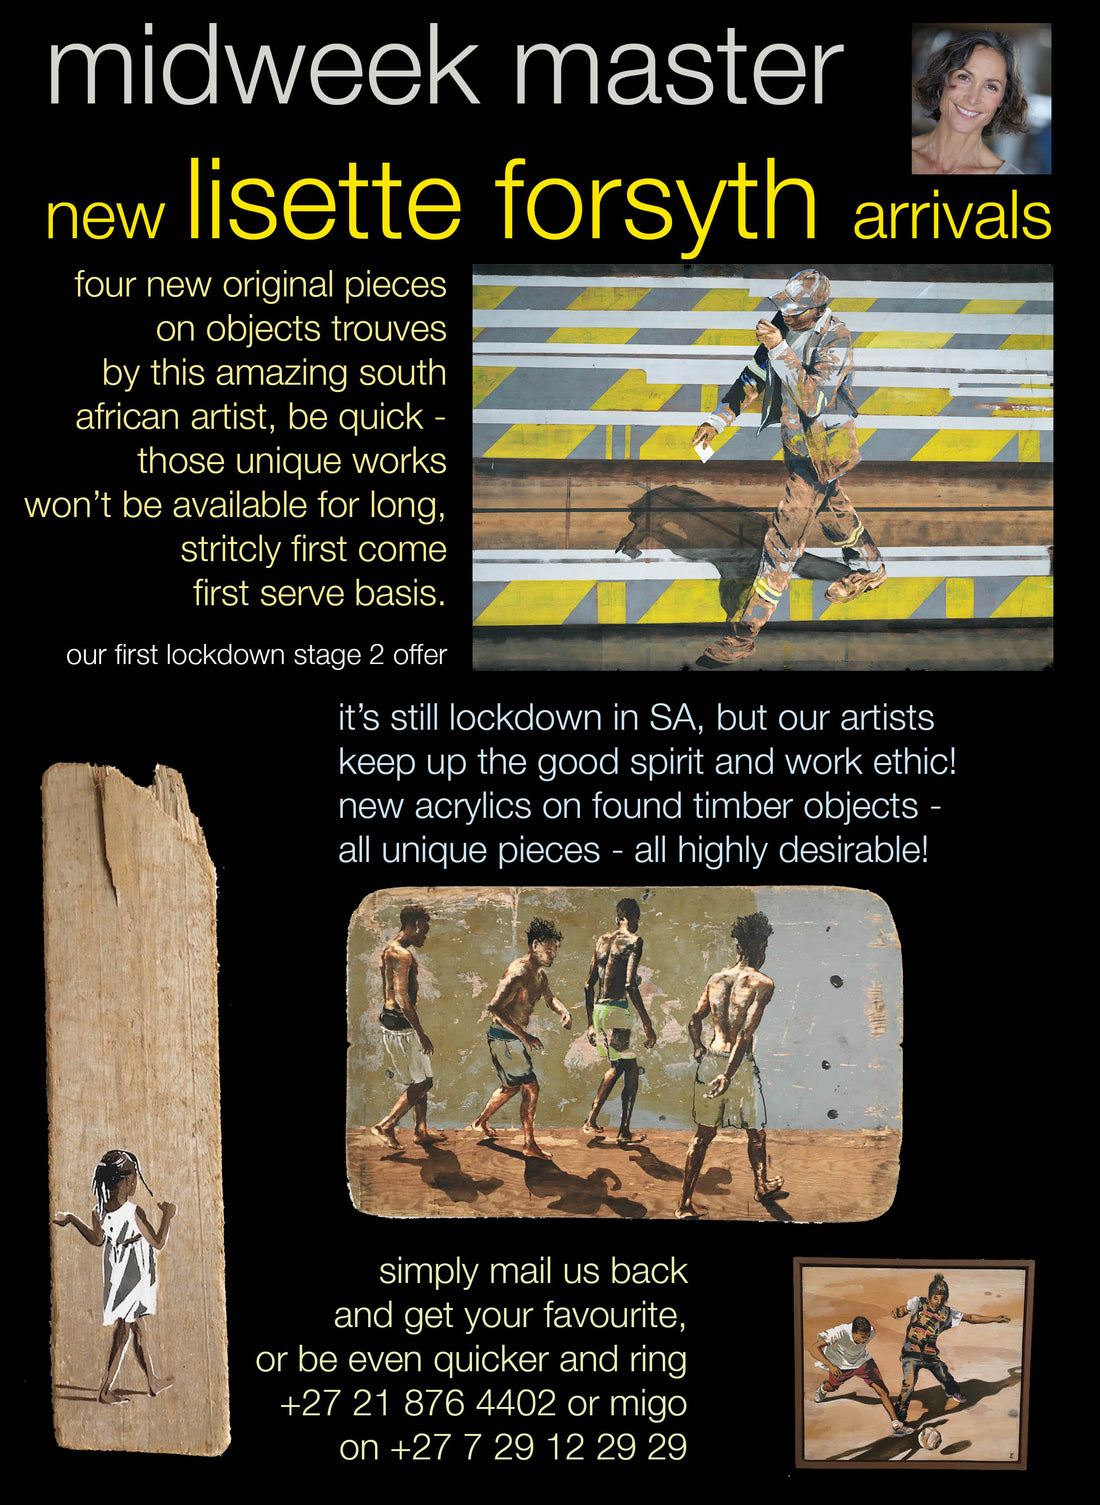 four new works by lisette forsyth on objects trouvés - be quick - our midweek master series continues